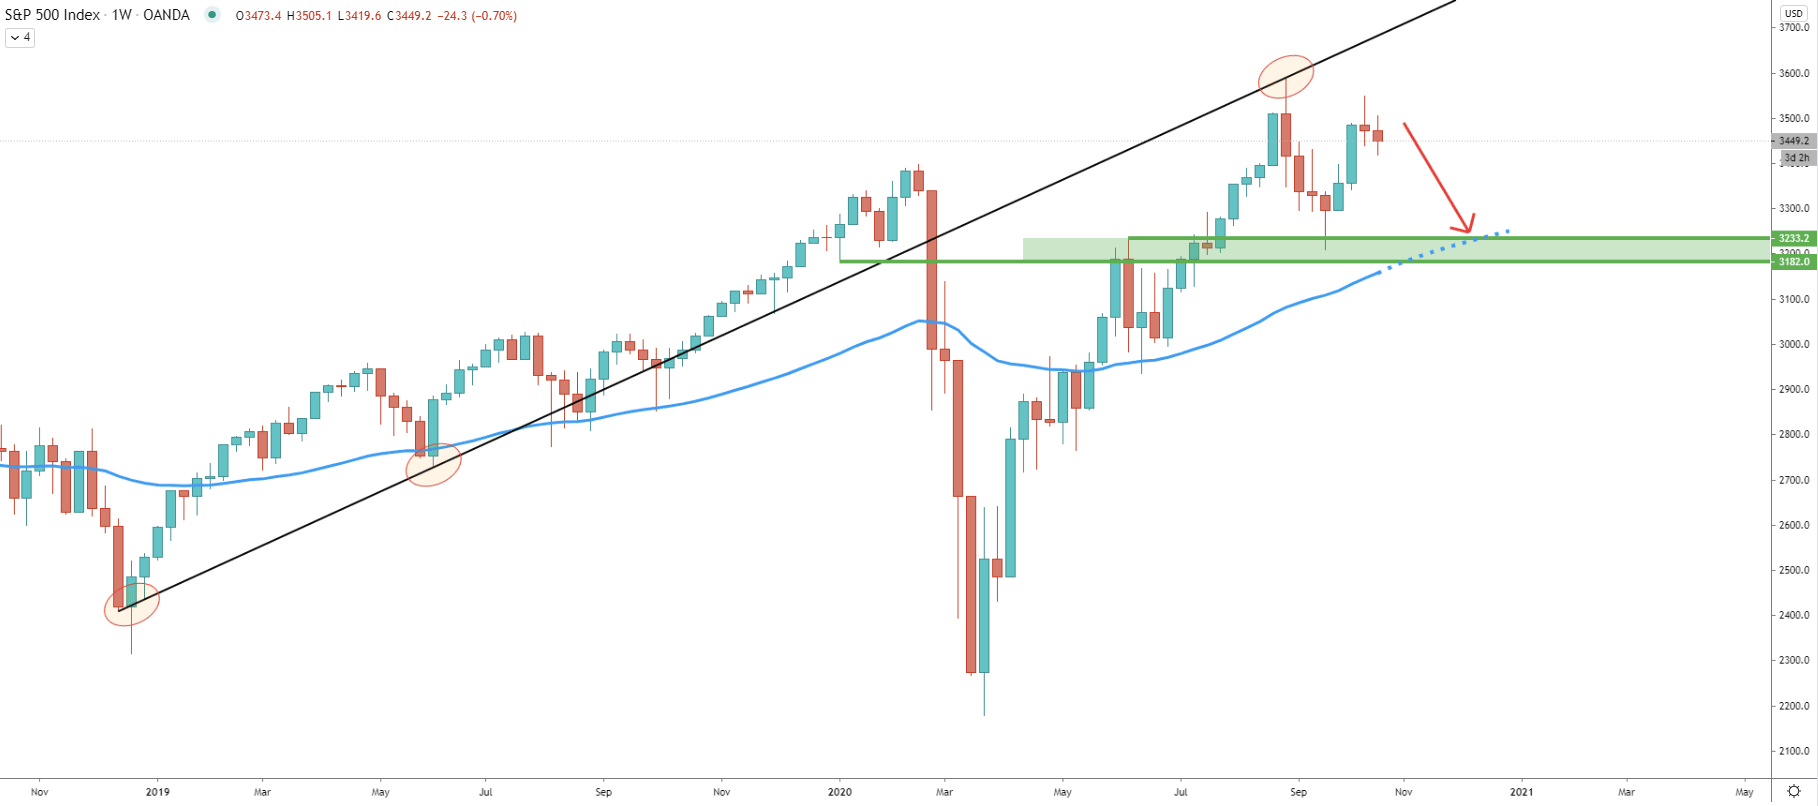 S&P500 Weekly Technical Analysis 20 Oct 2020